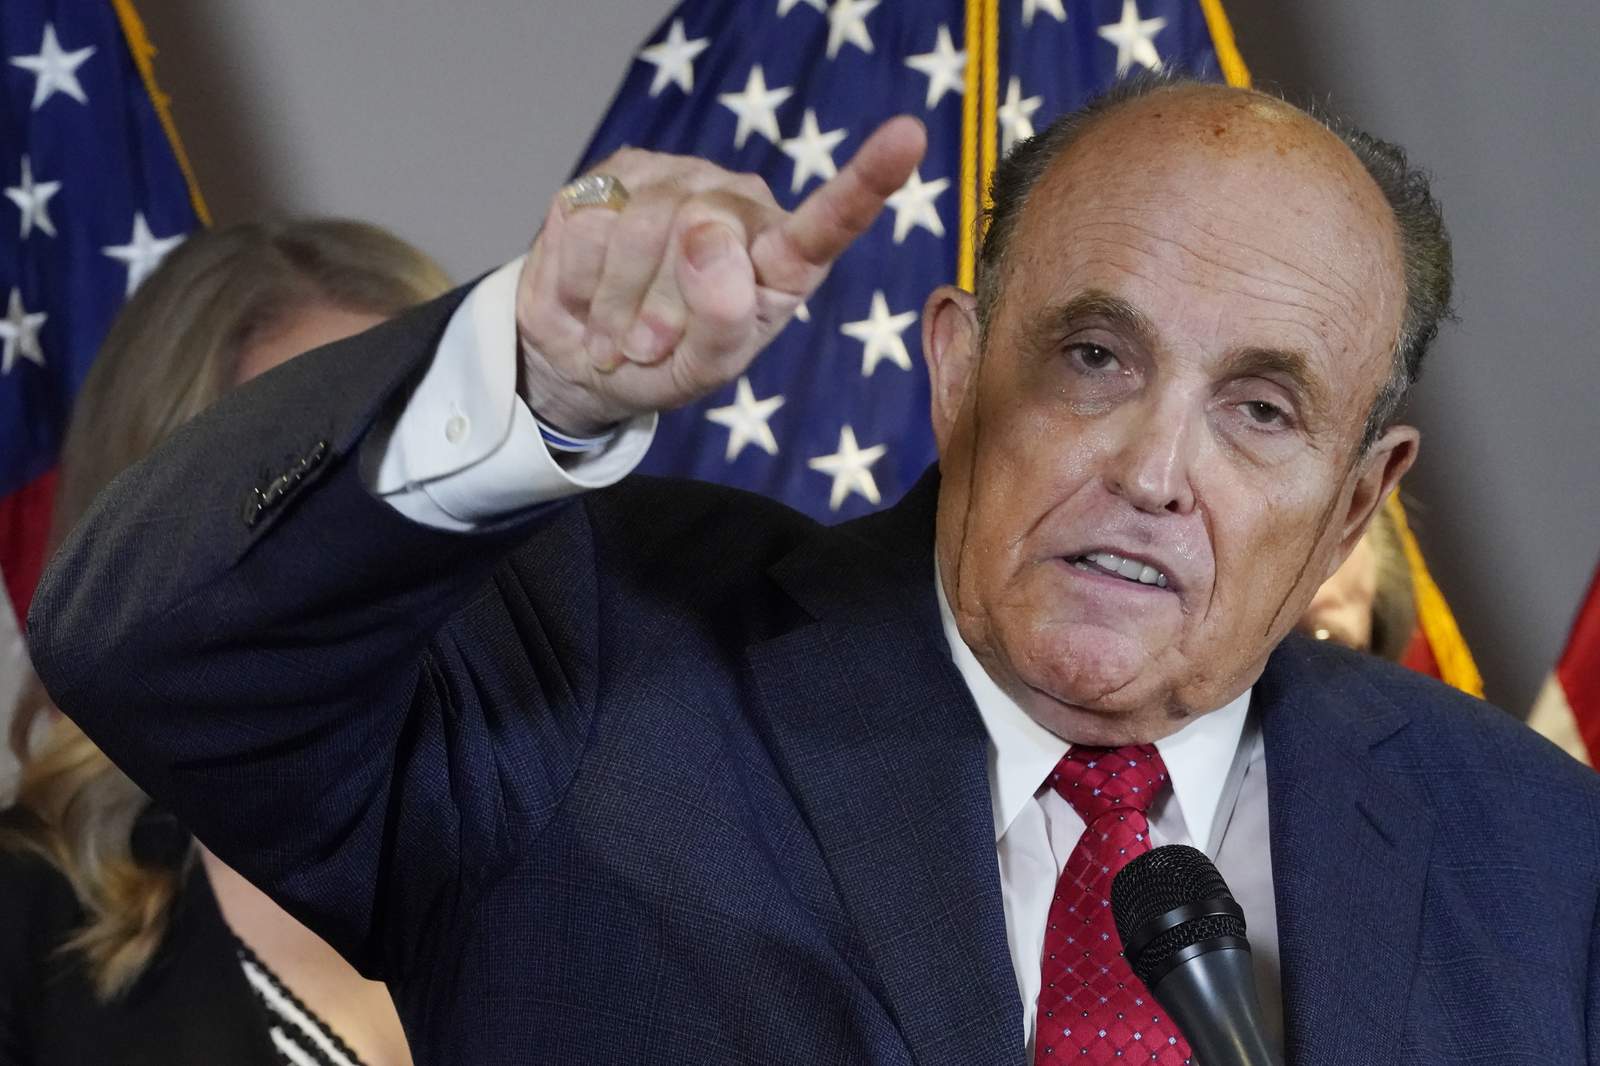 Rudy Giuliani tests positive for COVID-19, President Trump says